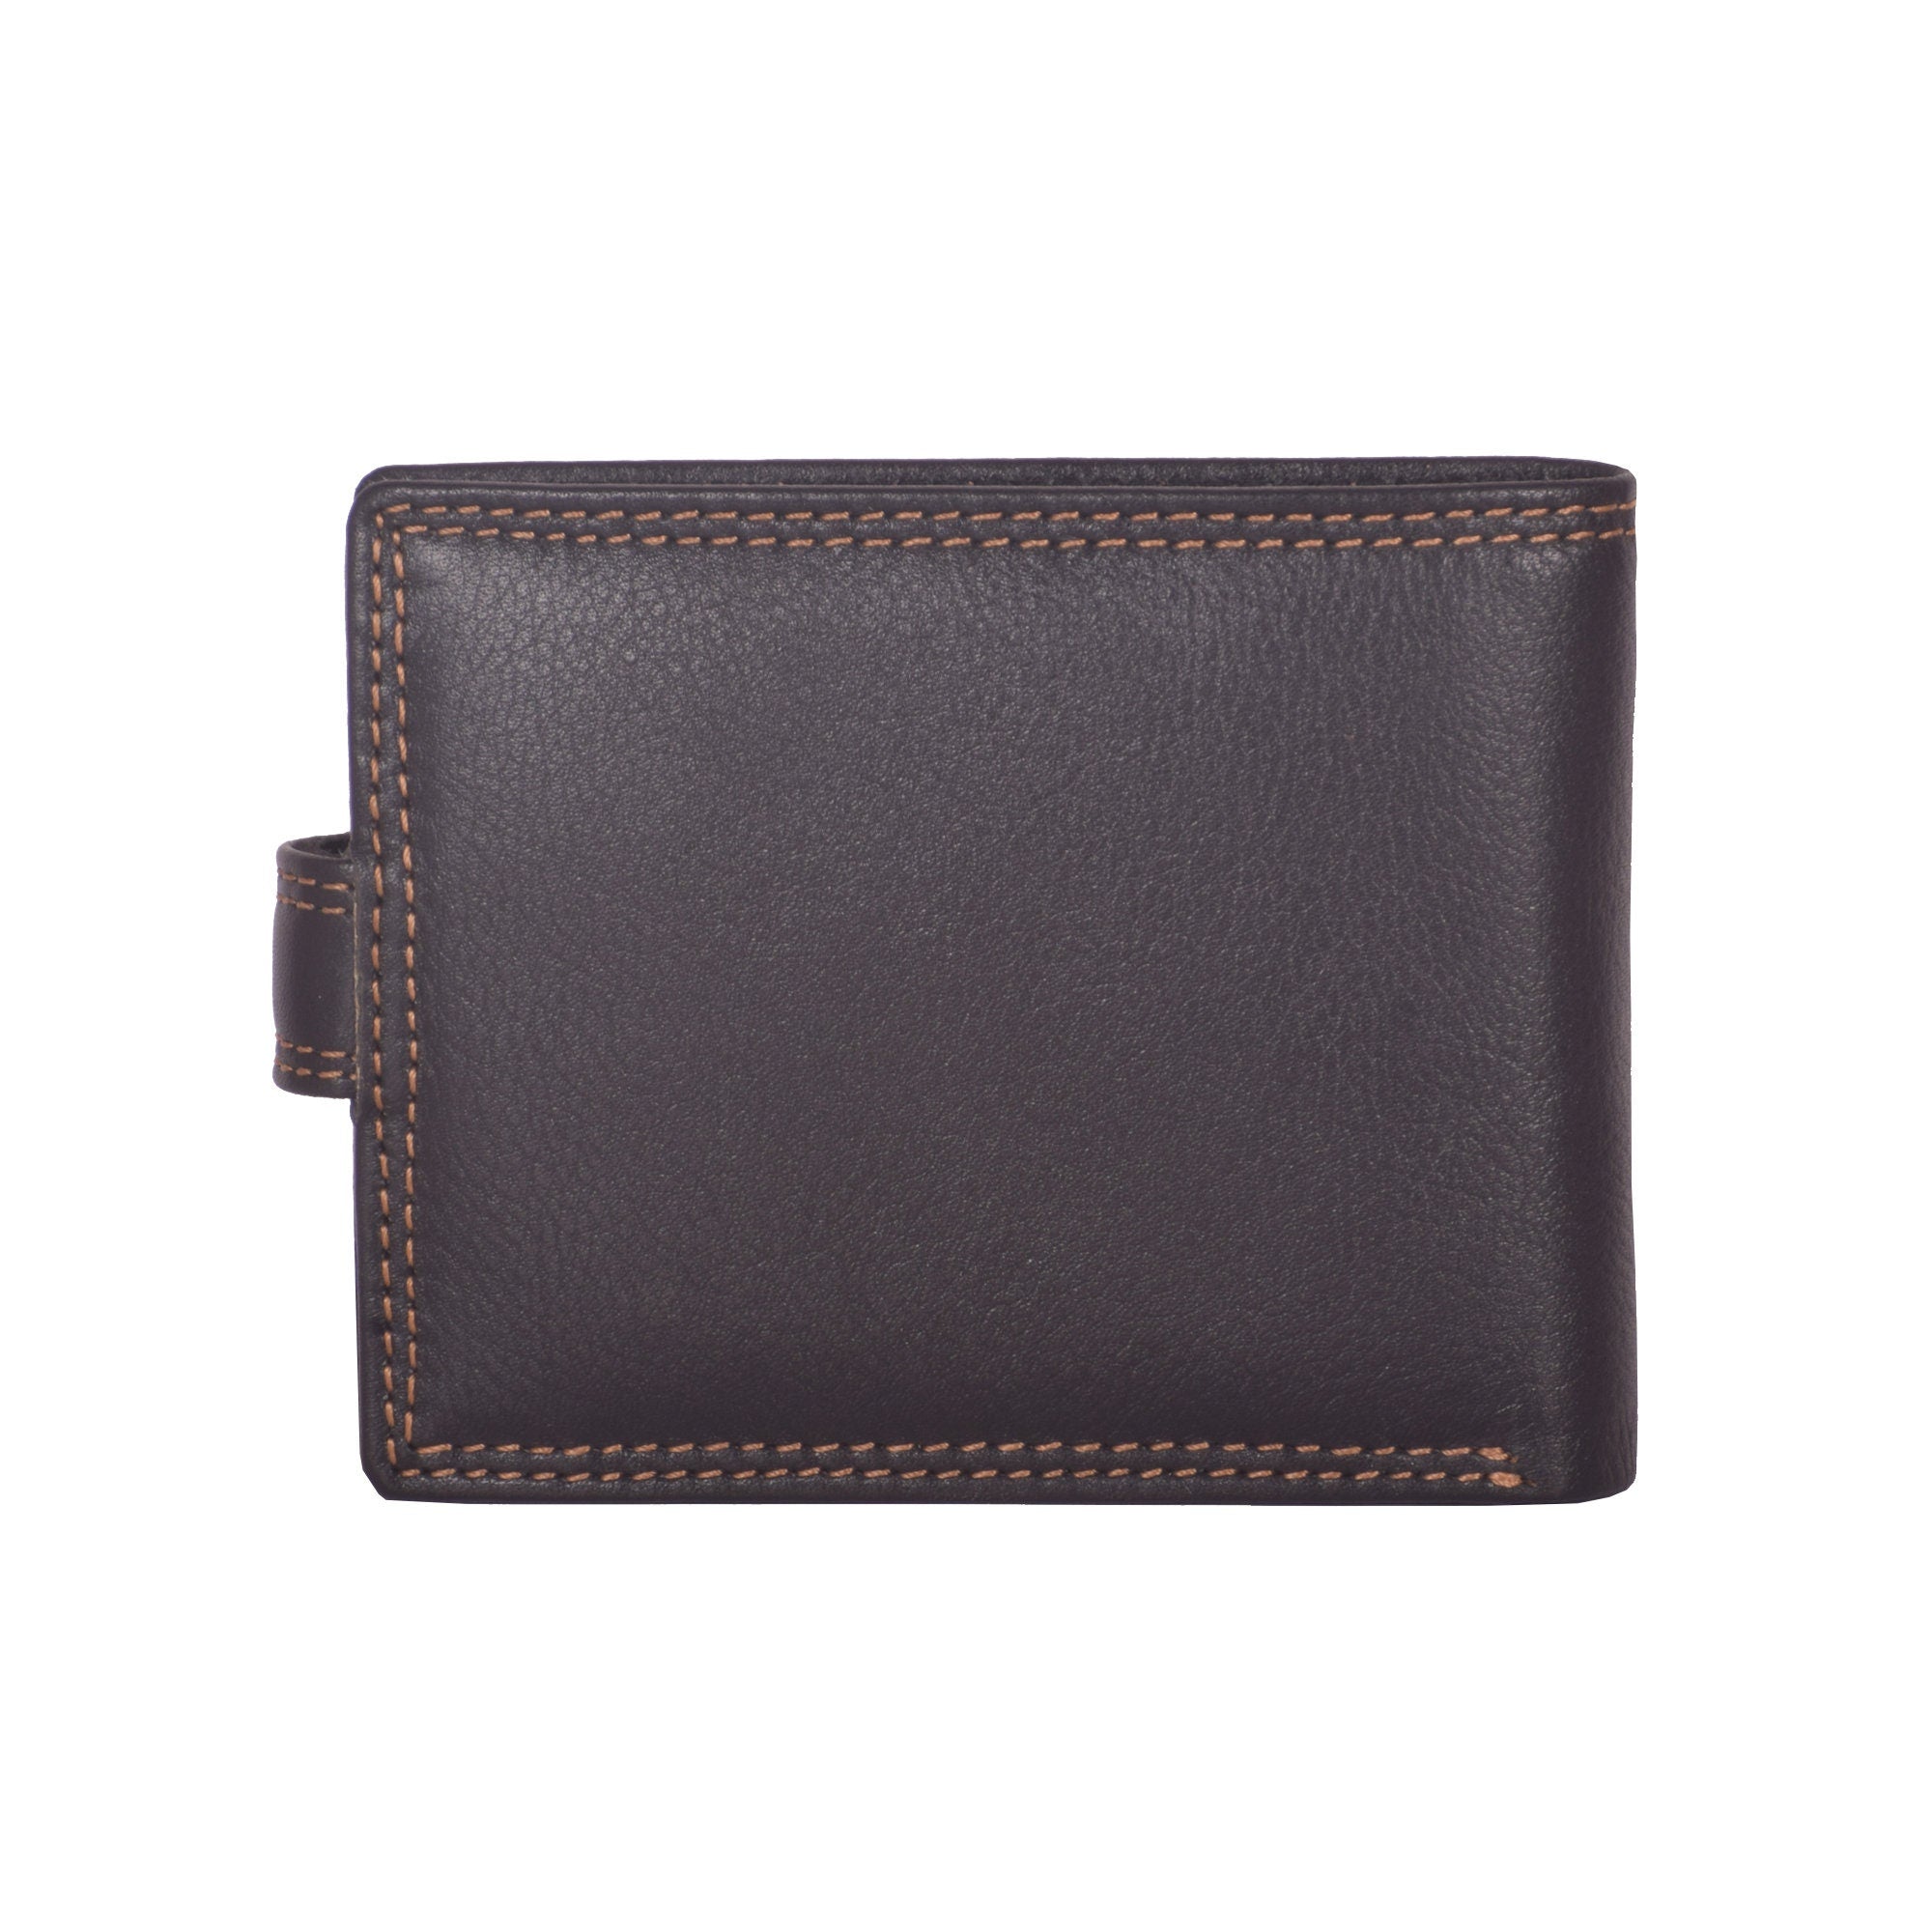 Contact's Genuine Crazy Horse Leather Vintage Trifold Men's Wallet